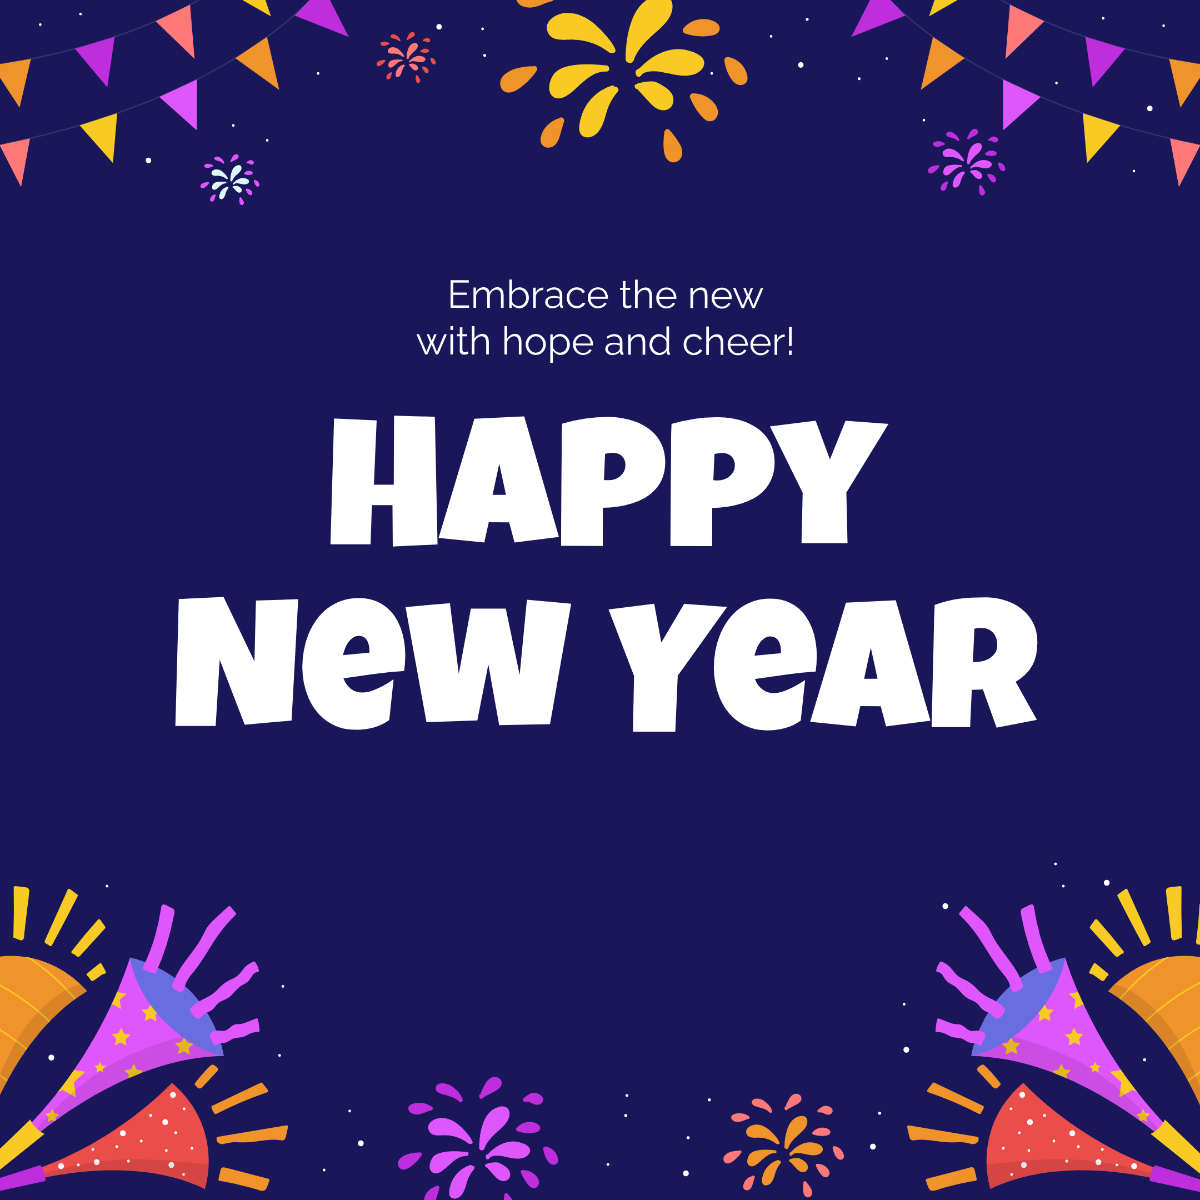 Free New Year Social Media Post for Instagram Template